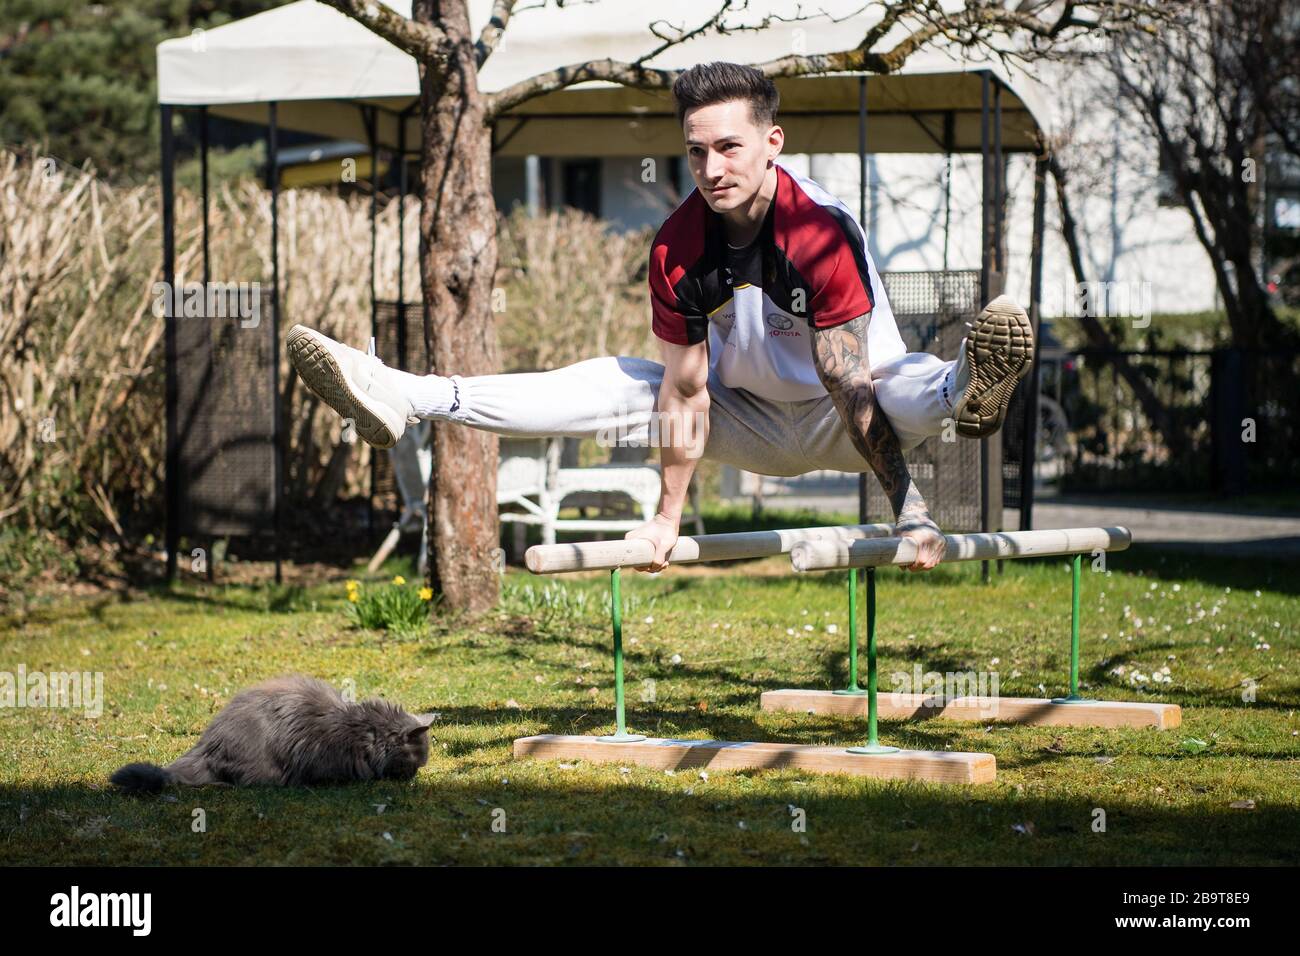 Voorzien controller Ijzig Unterhaching, Germany. 24th Mar, 2020. Marcel Nguyen, artistic gymnast,  trains on a training bar in his mother's garden. The family cat Coco sits  on the lawn. Due to the corona virus, training